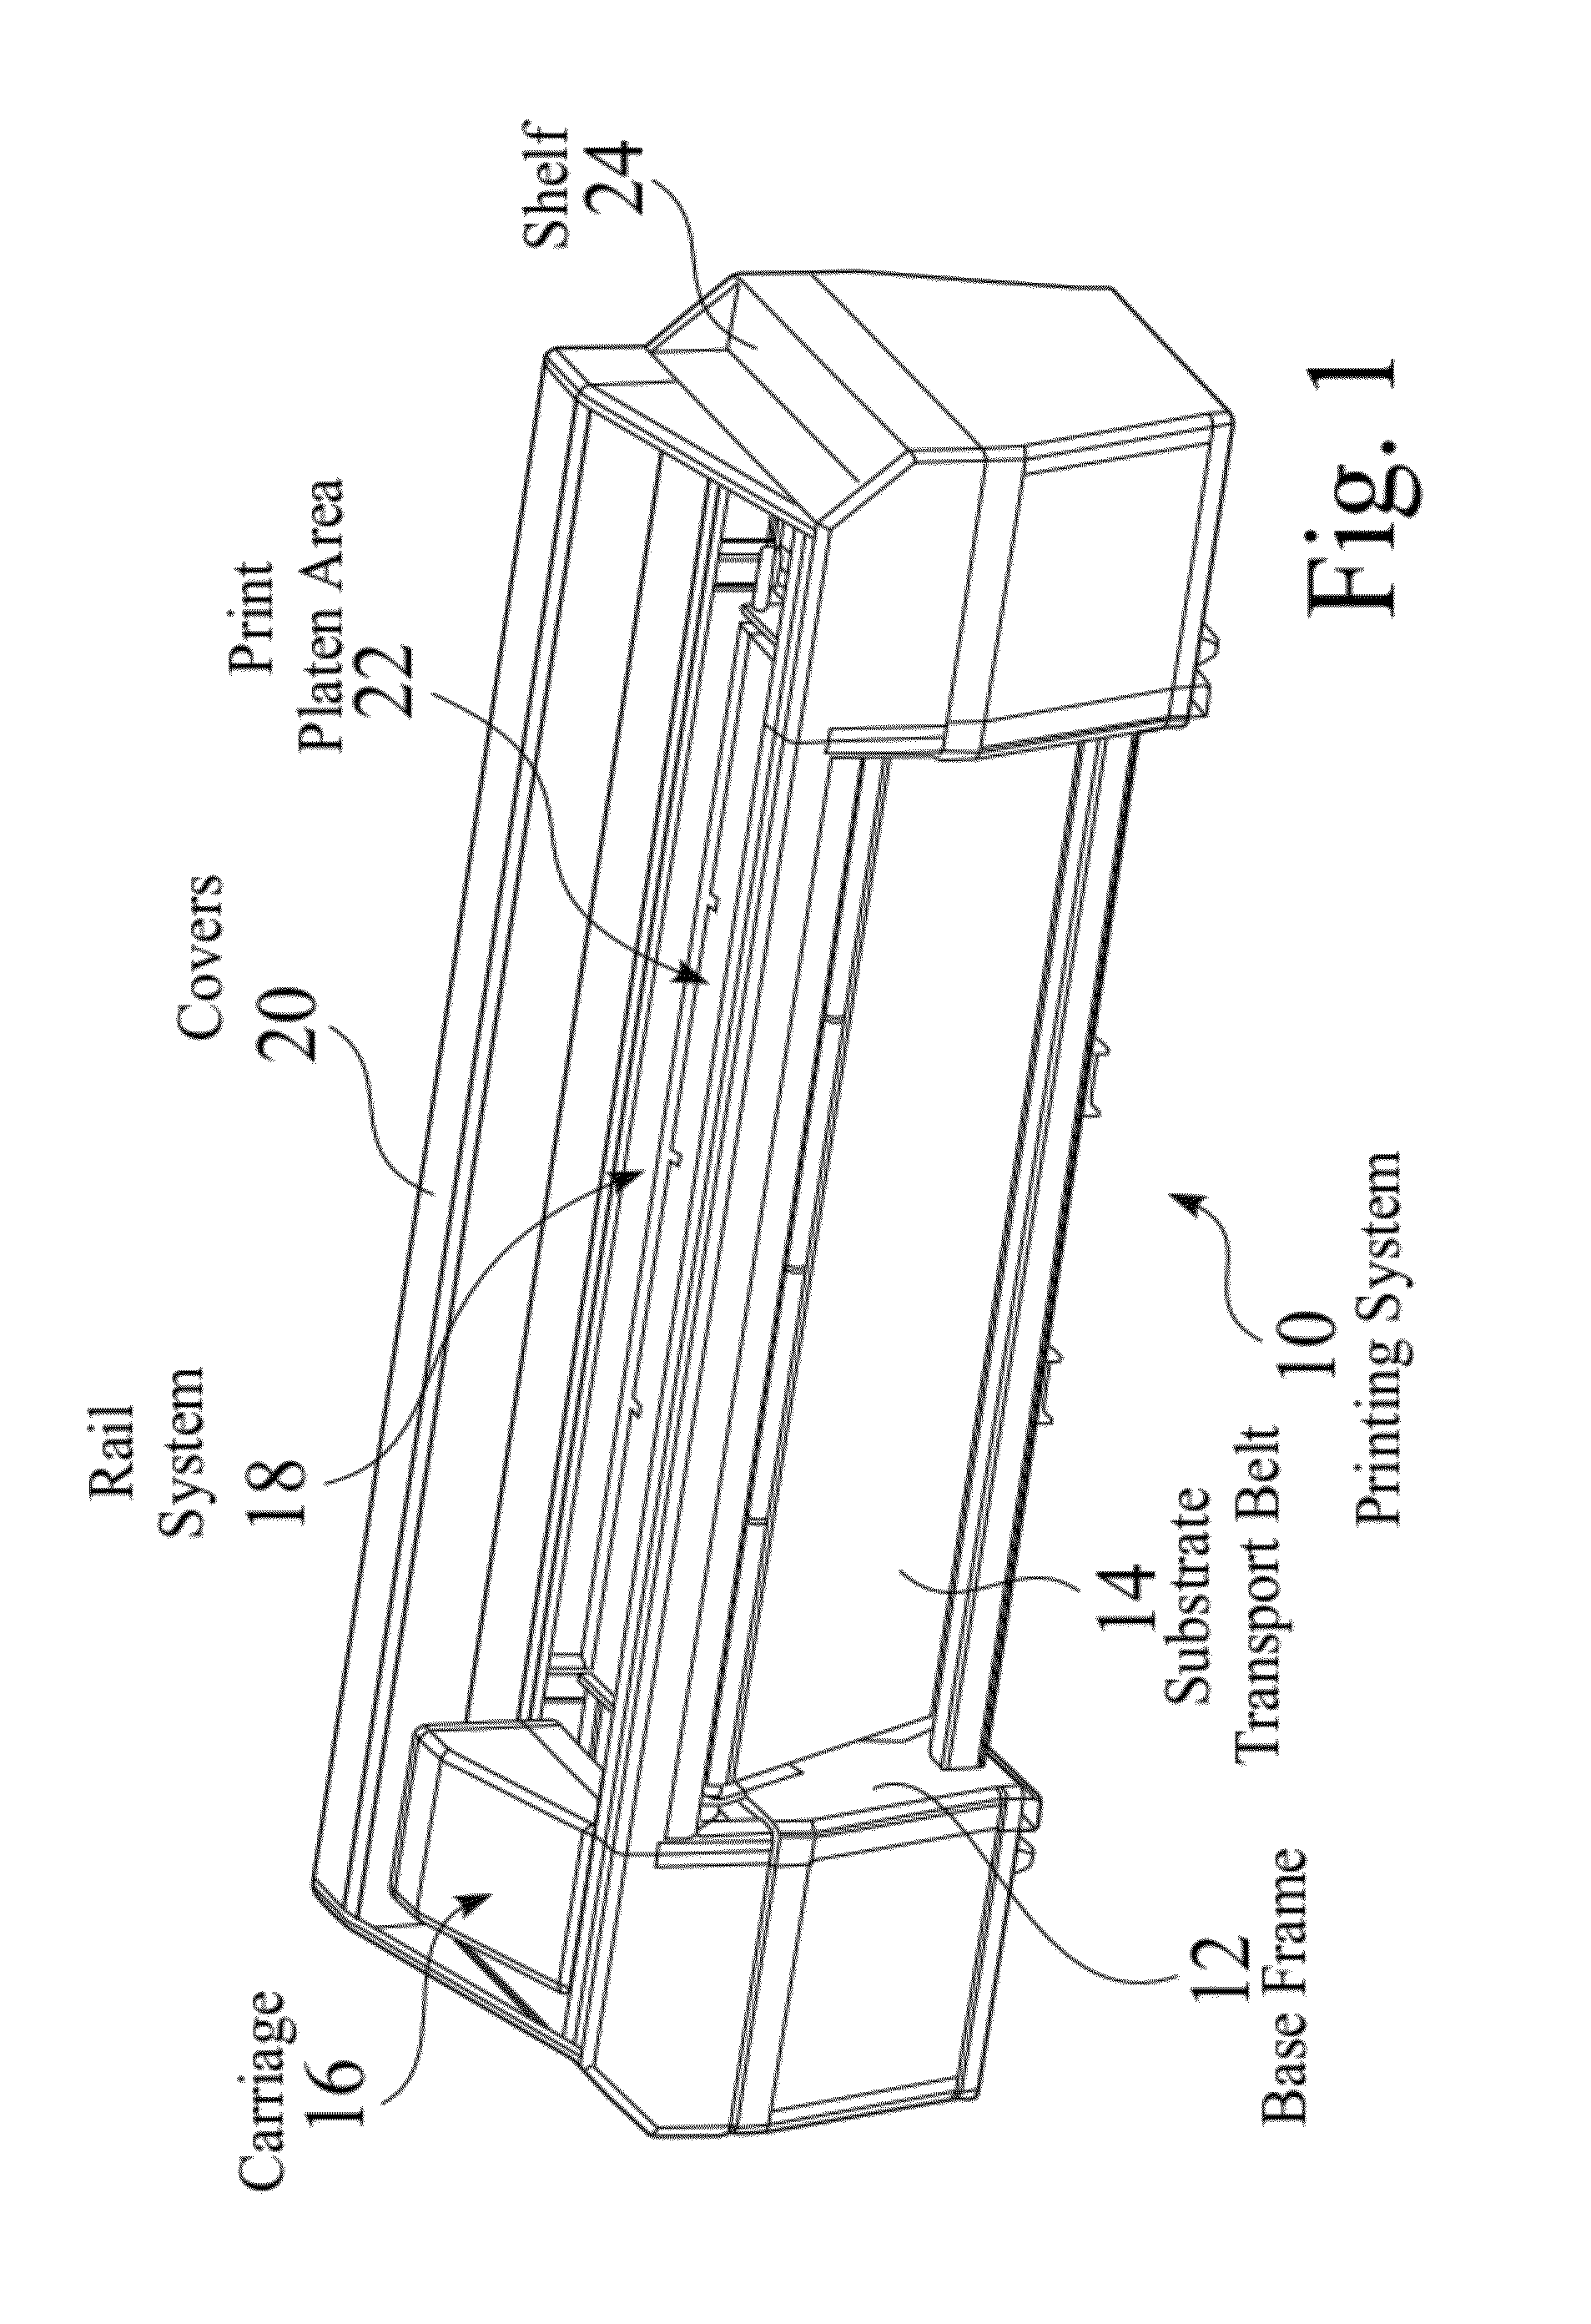 Binary epoxy ink and enhanced printer systems, structures, and associated methods